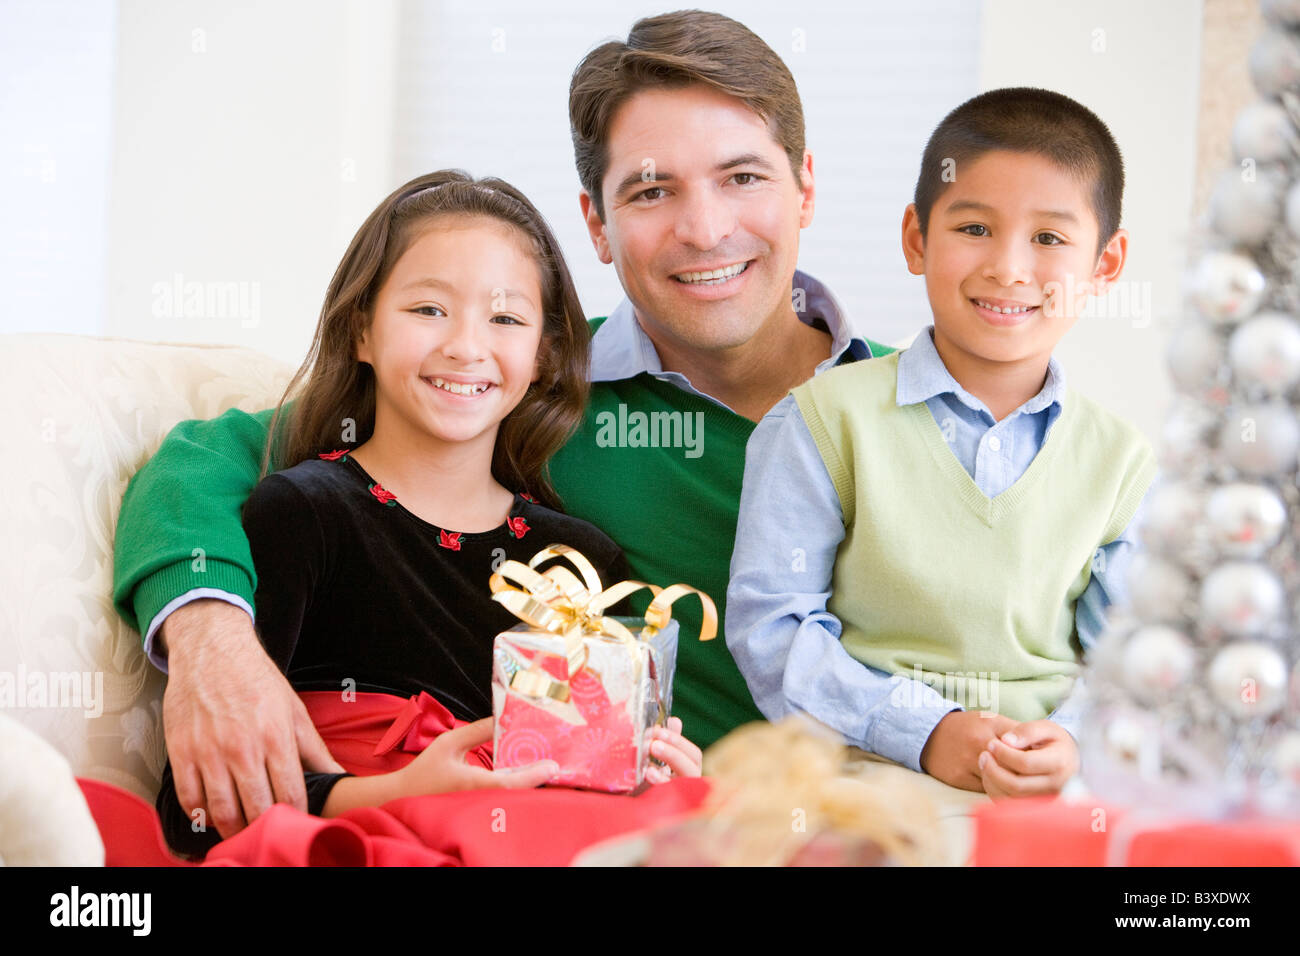 Father And His Son And Daughter Sitting On Sofa, Holding A Christmas Present Stock Photo